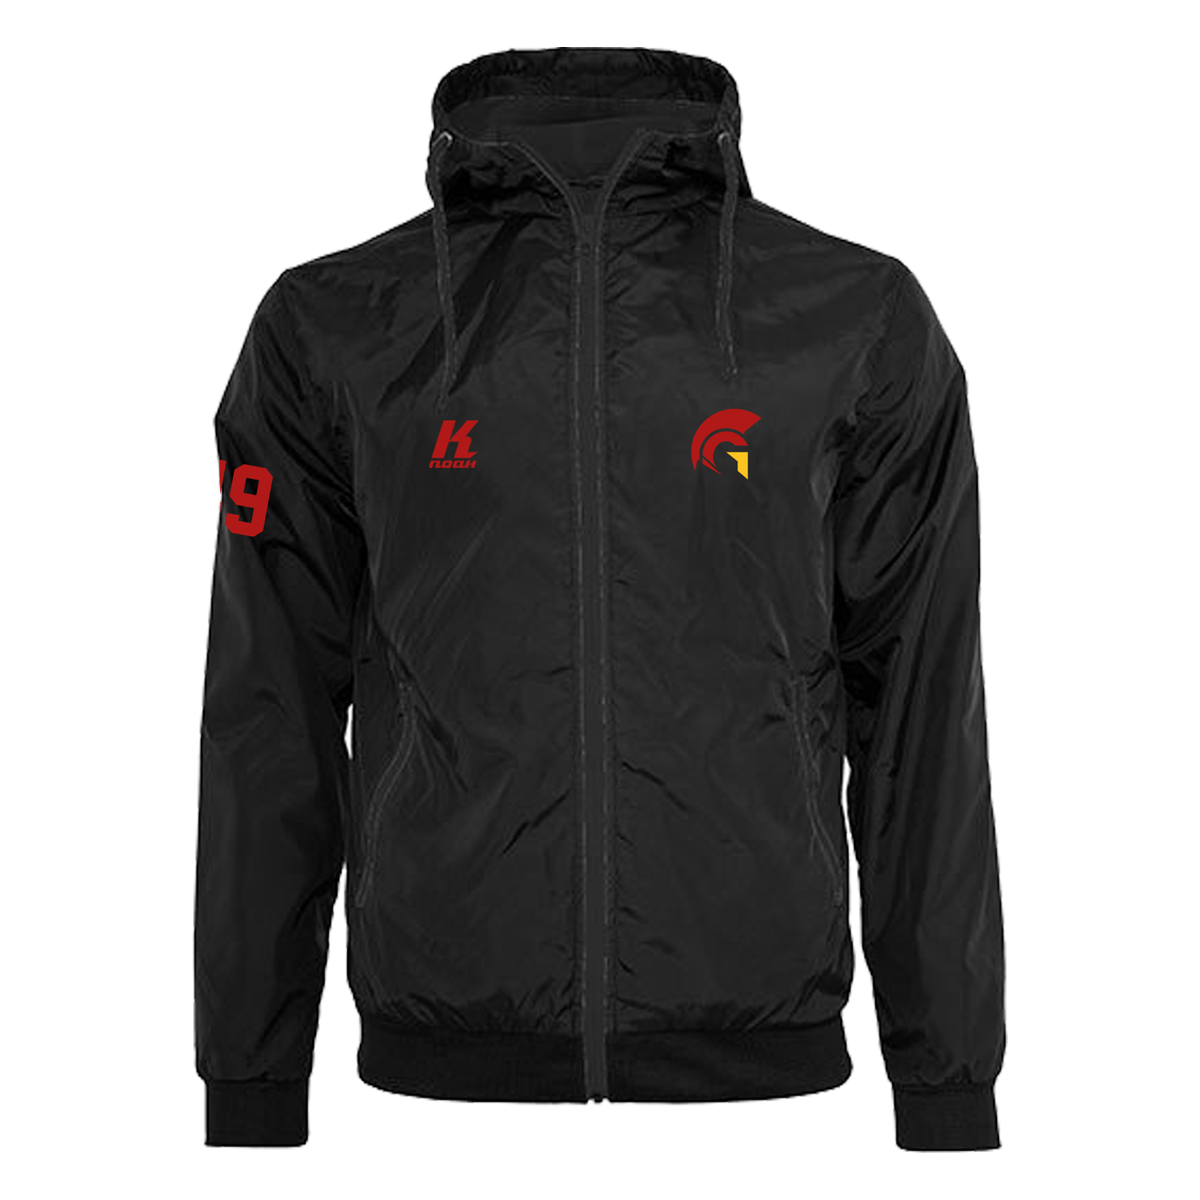 Gladiators Windrunner Jacket with Playernumber/Initials